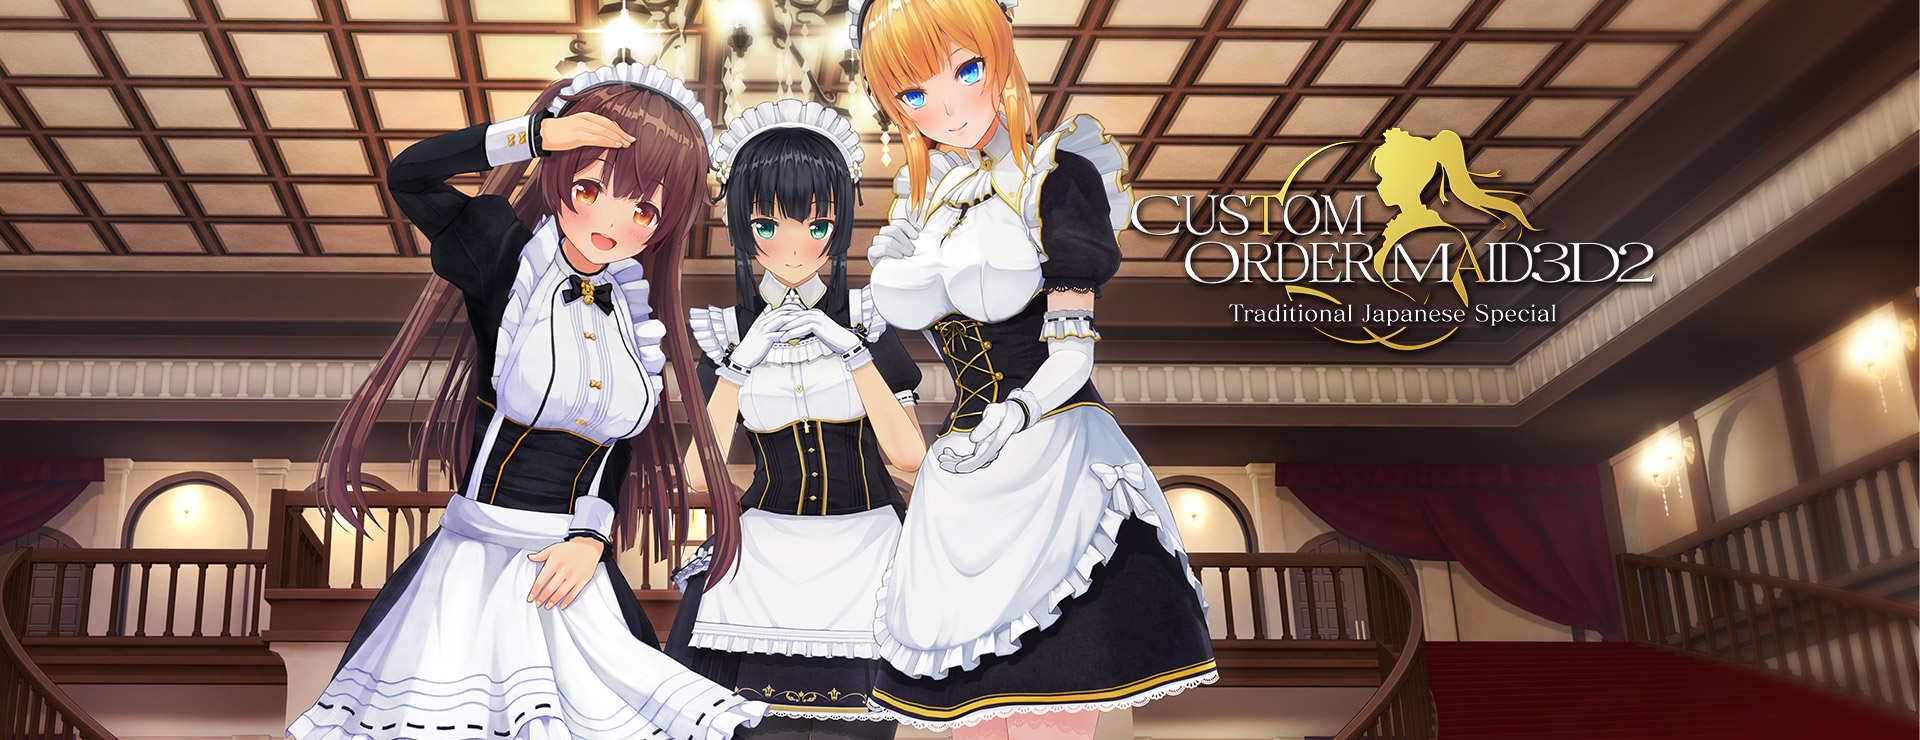 Custom Order Maid 3D2: Traditional Japanese Special All in Pack - シミュレーション ゲーム